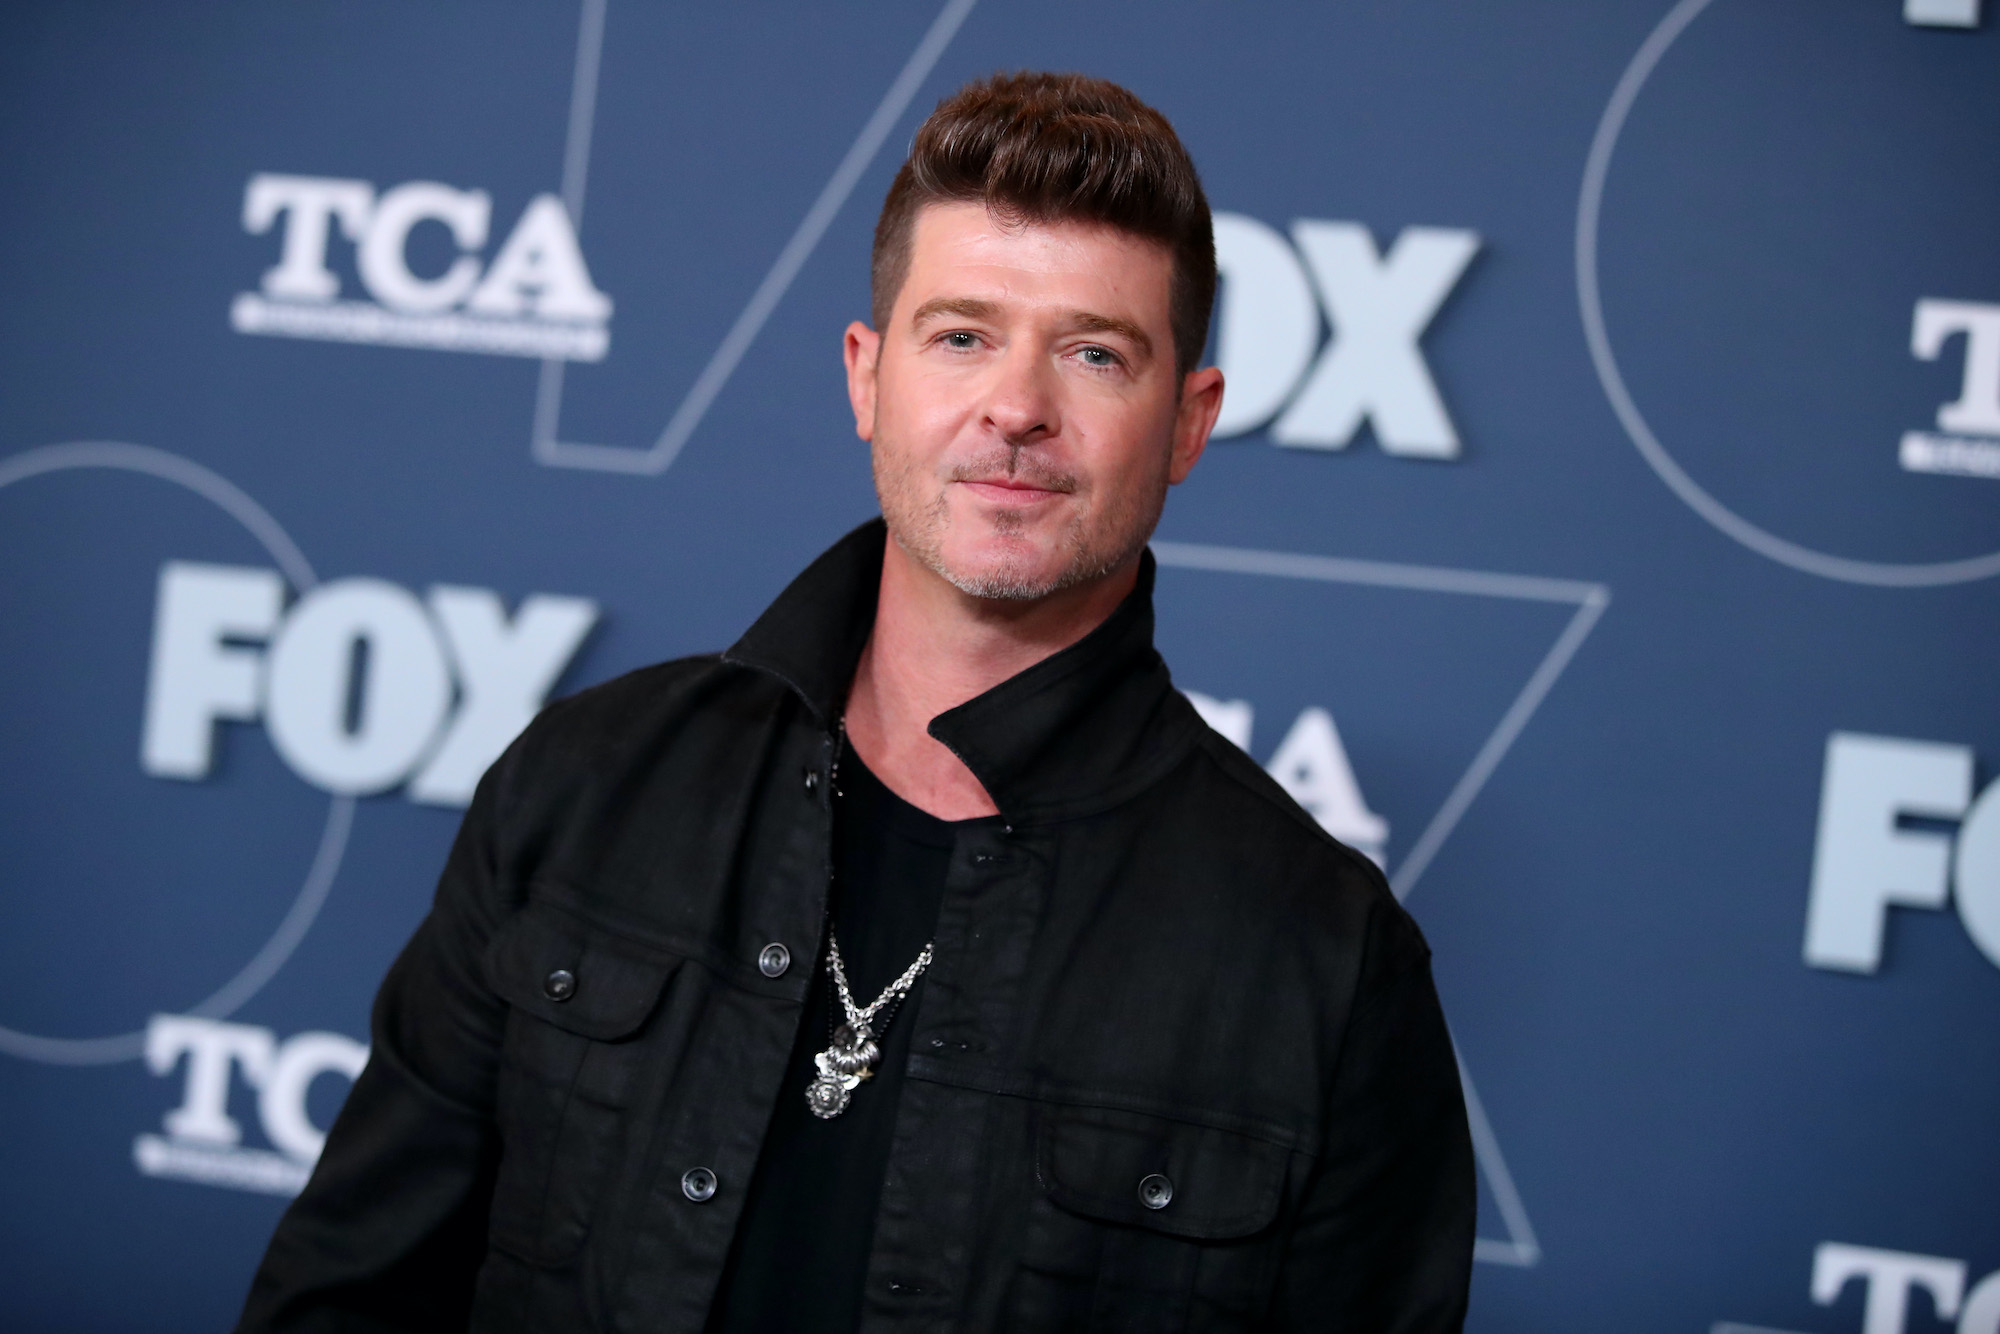 Robin Thicke Realized He Still Desperately Sought Approval From His Dad Alan Thicke as an Adult: ‘Maybe If I’m a Rockstar He’ll Hang out With Me’